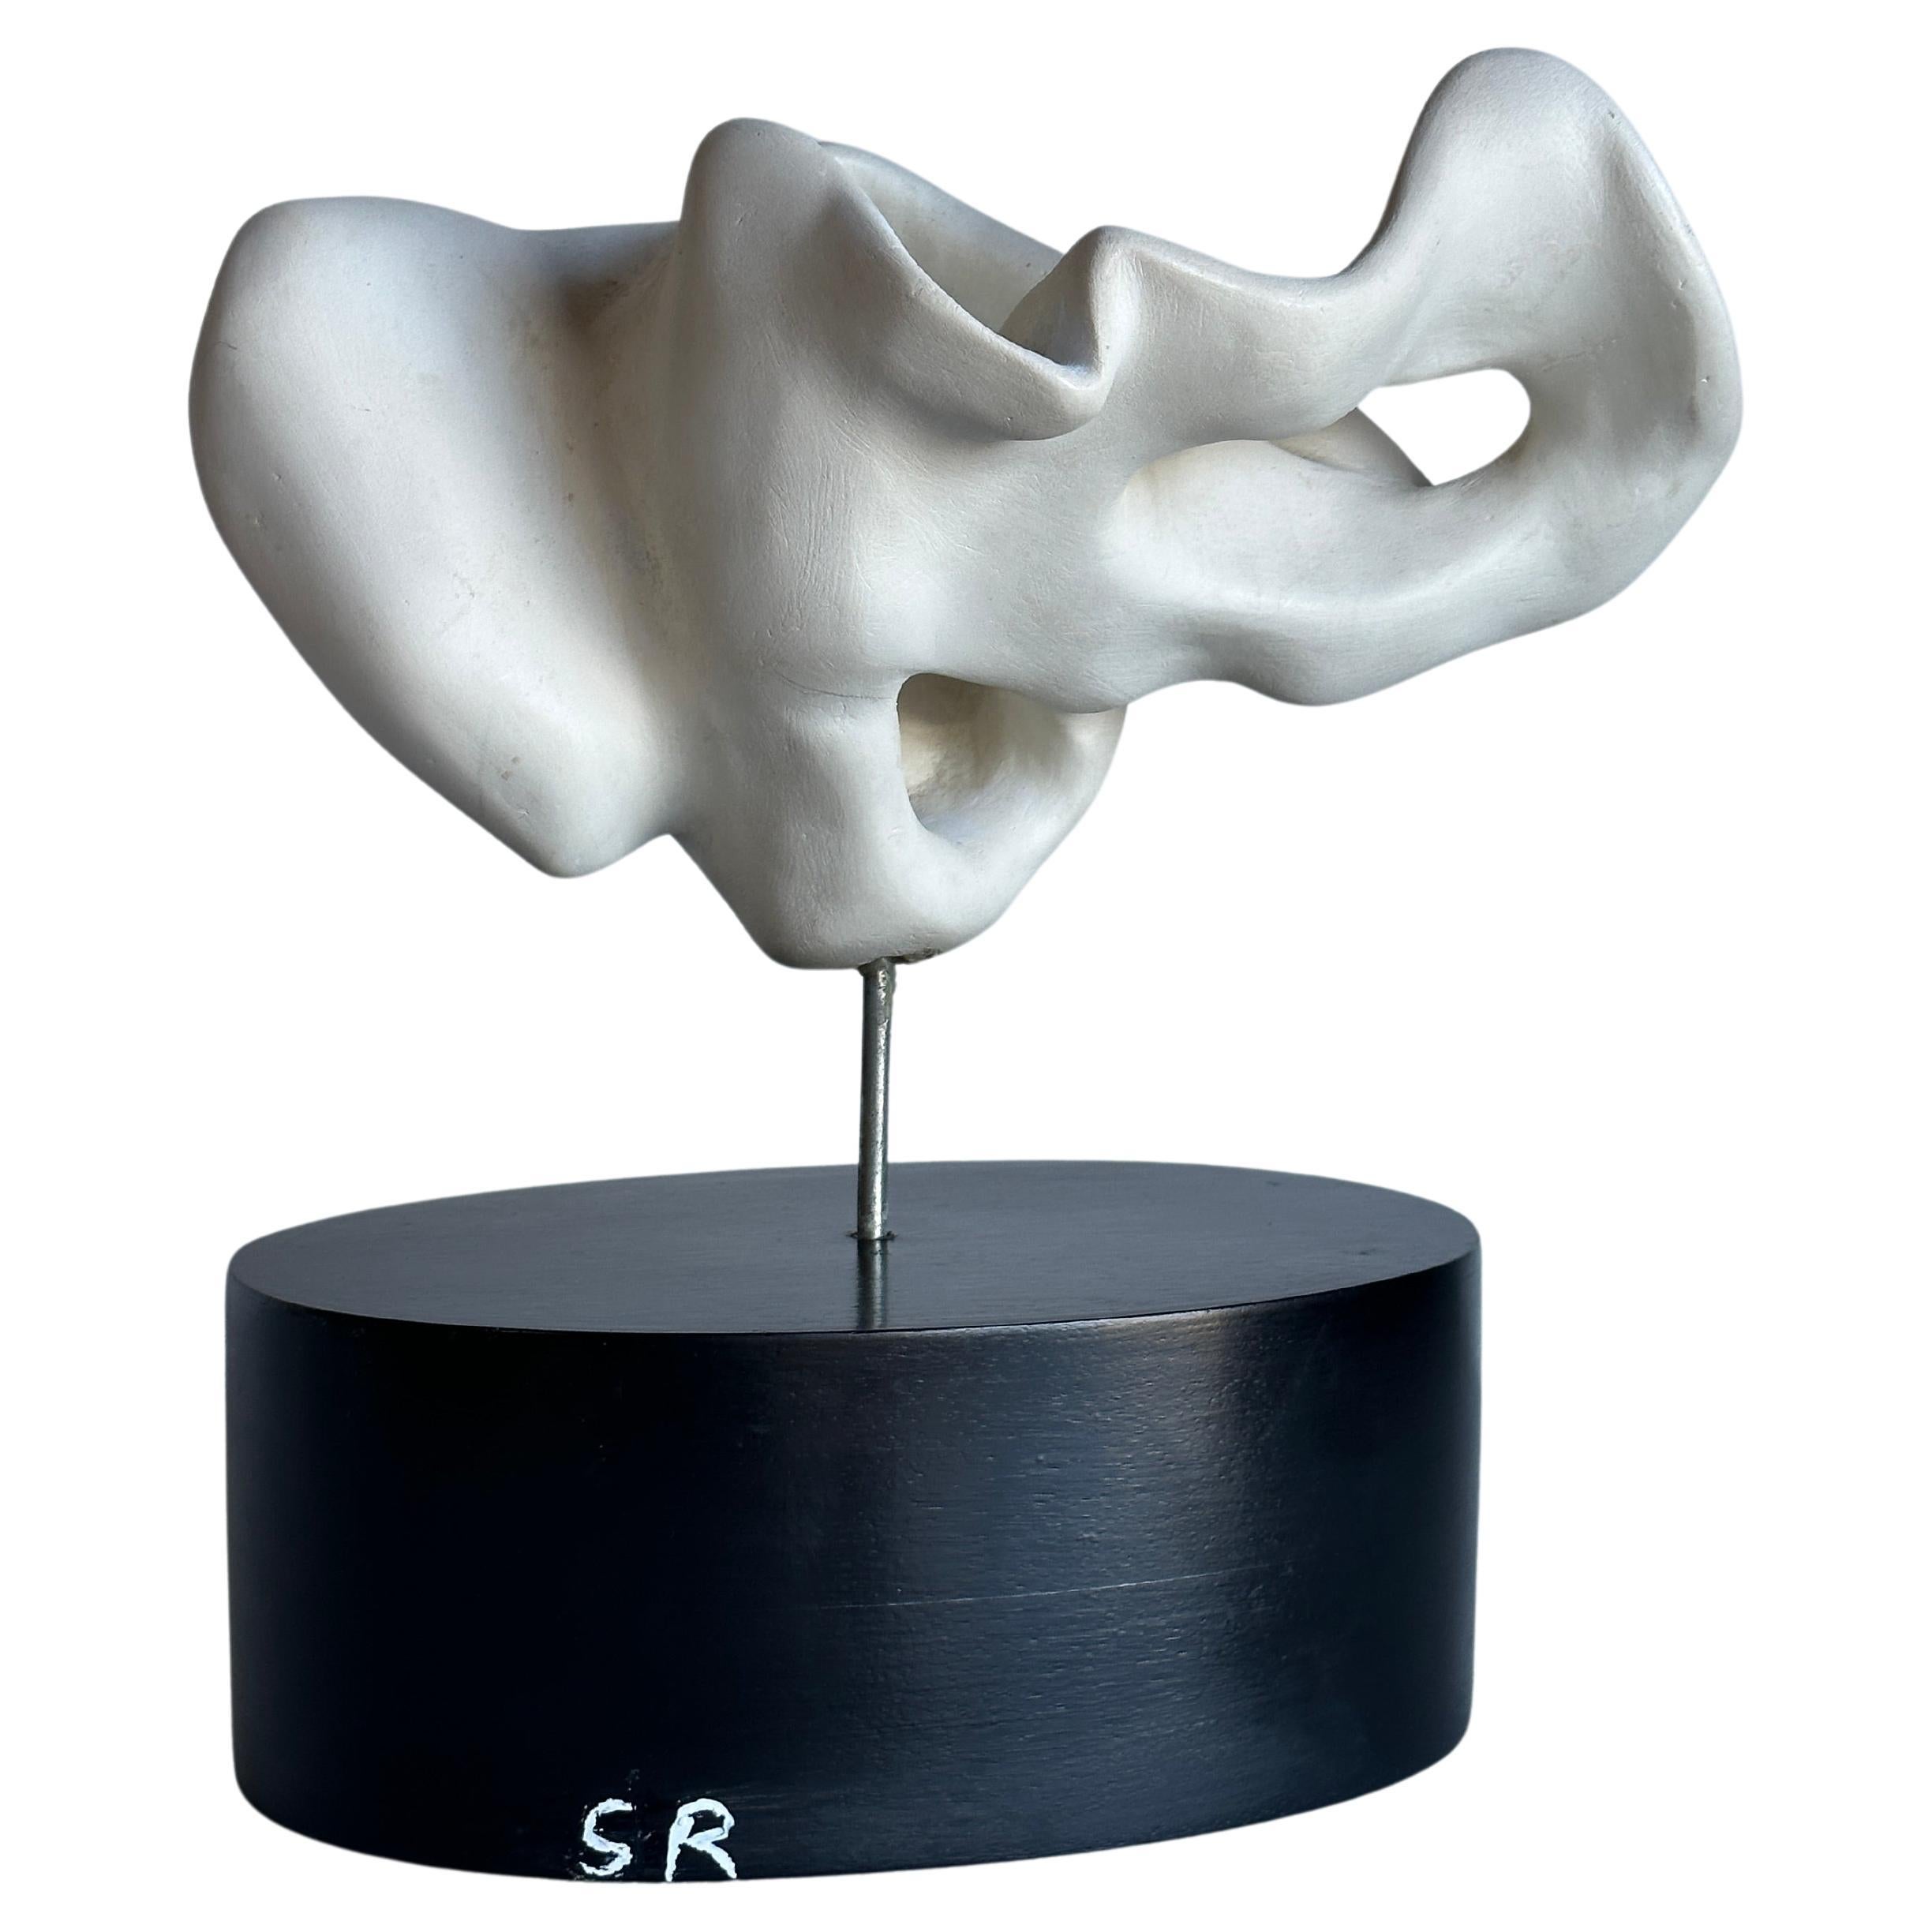 Artist Made White Plaster Biomorphic Tabletop Sculpture on Black Wood Stand For Sale